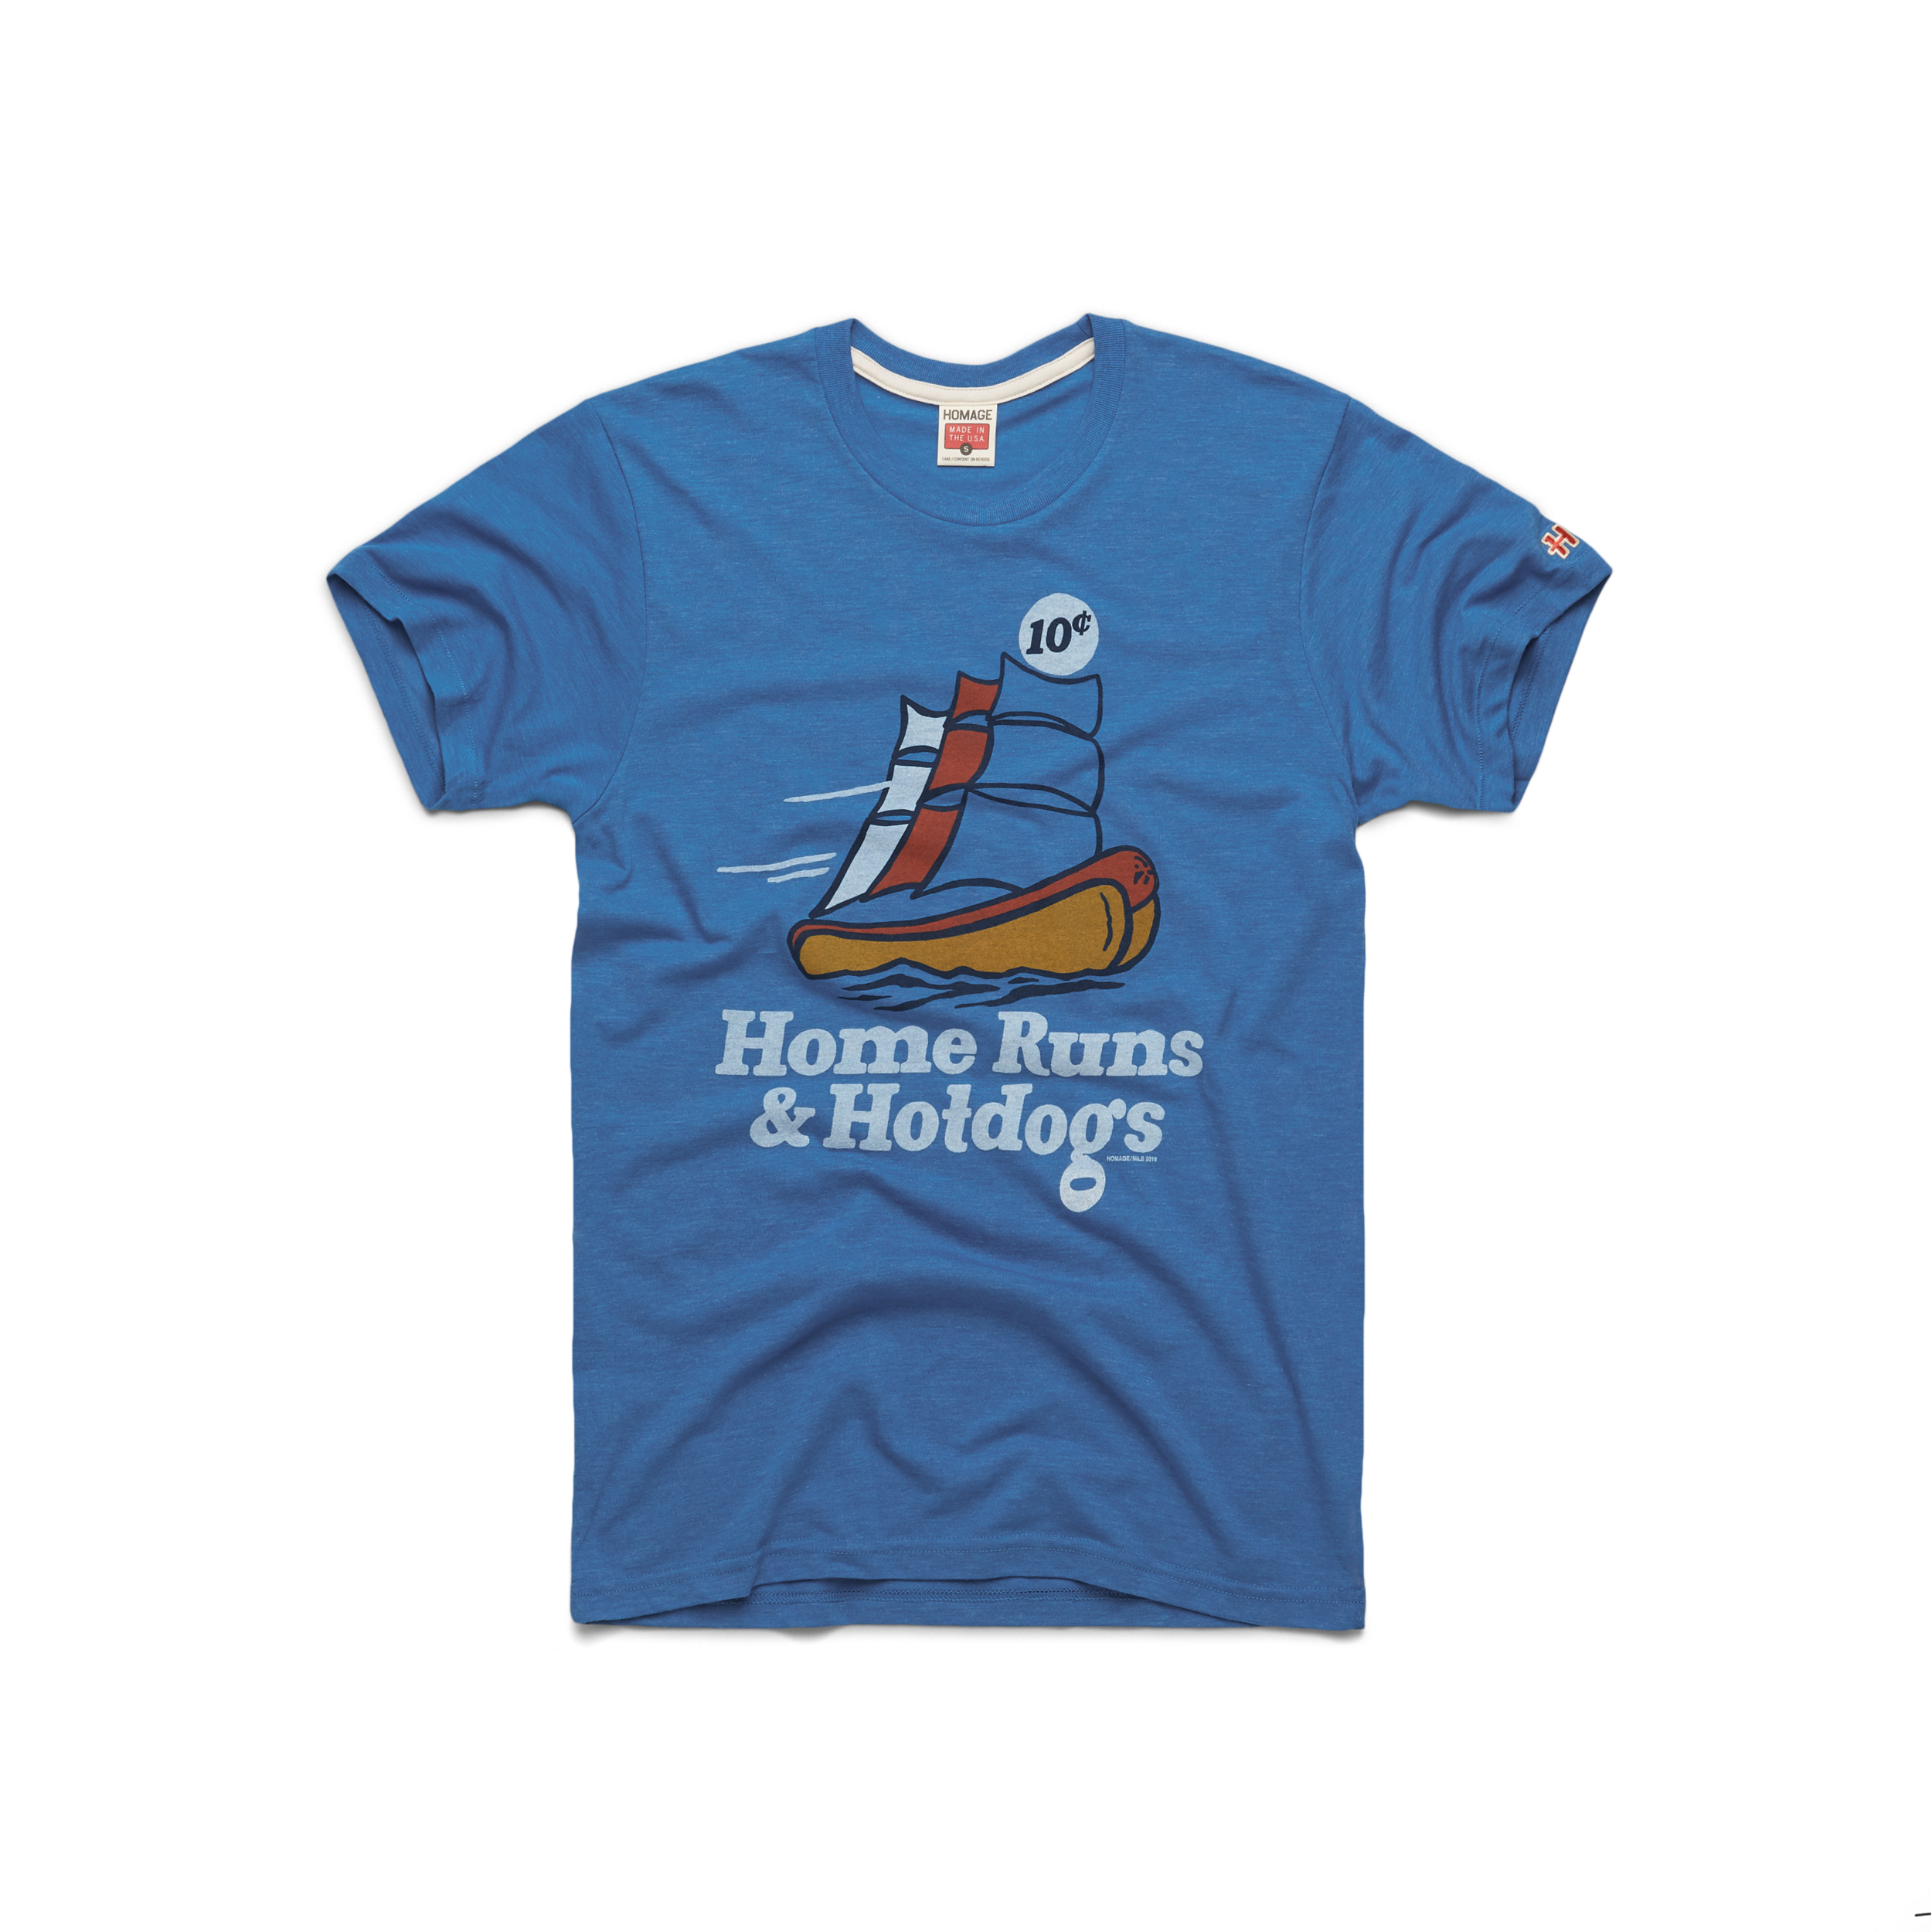 Clippers-Home-Runs-and-Hotdogs-01010465818-royal-blue-flat.png